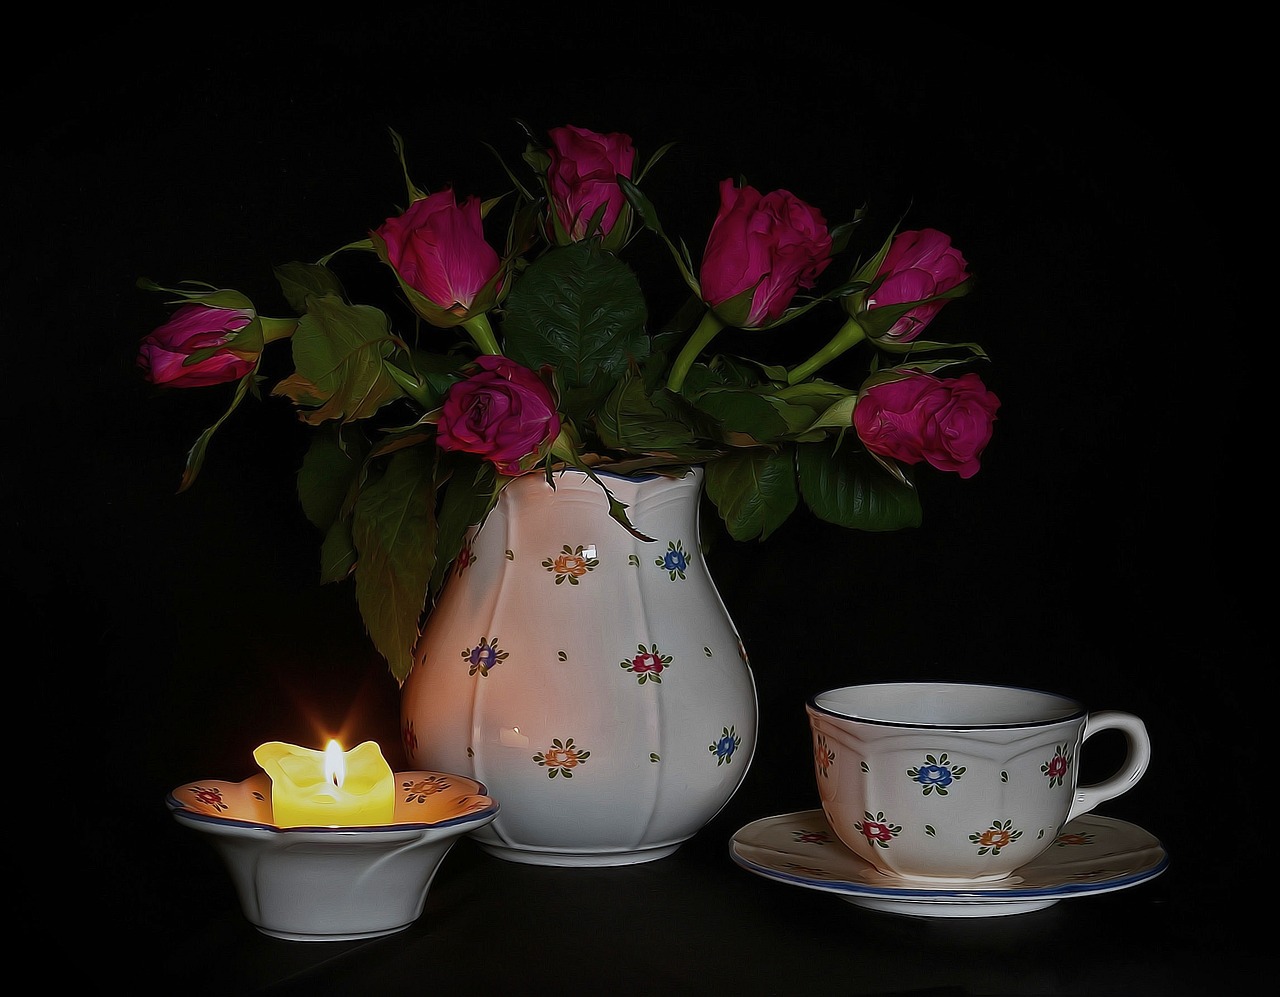 roses candle still life free photo